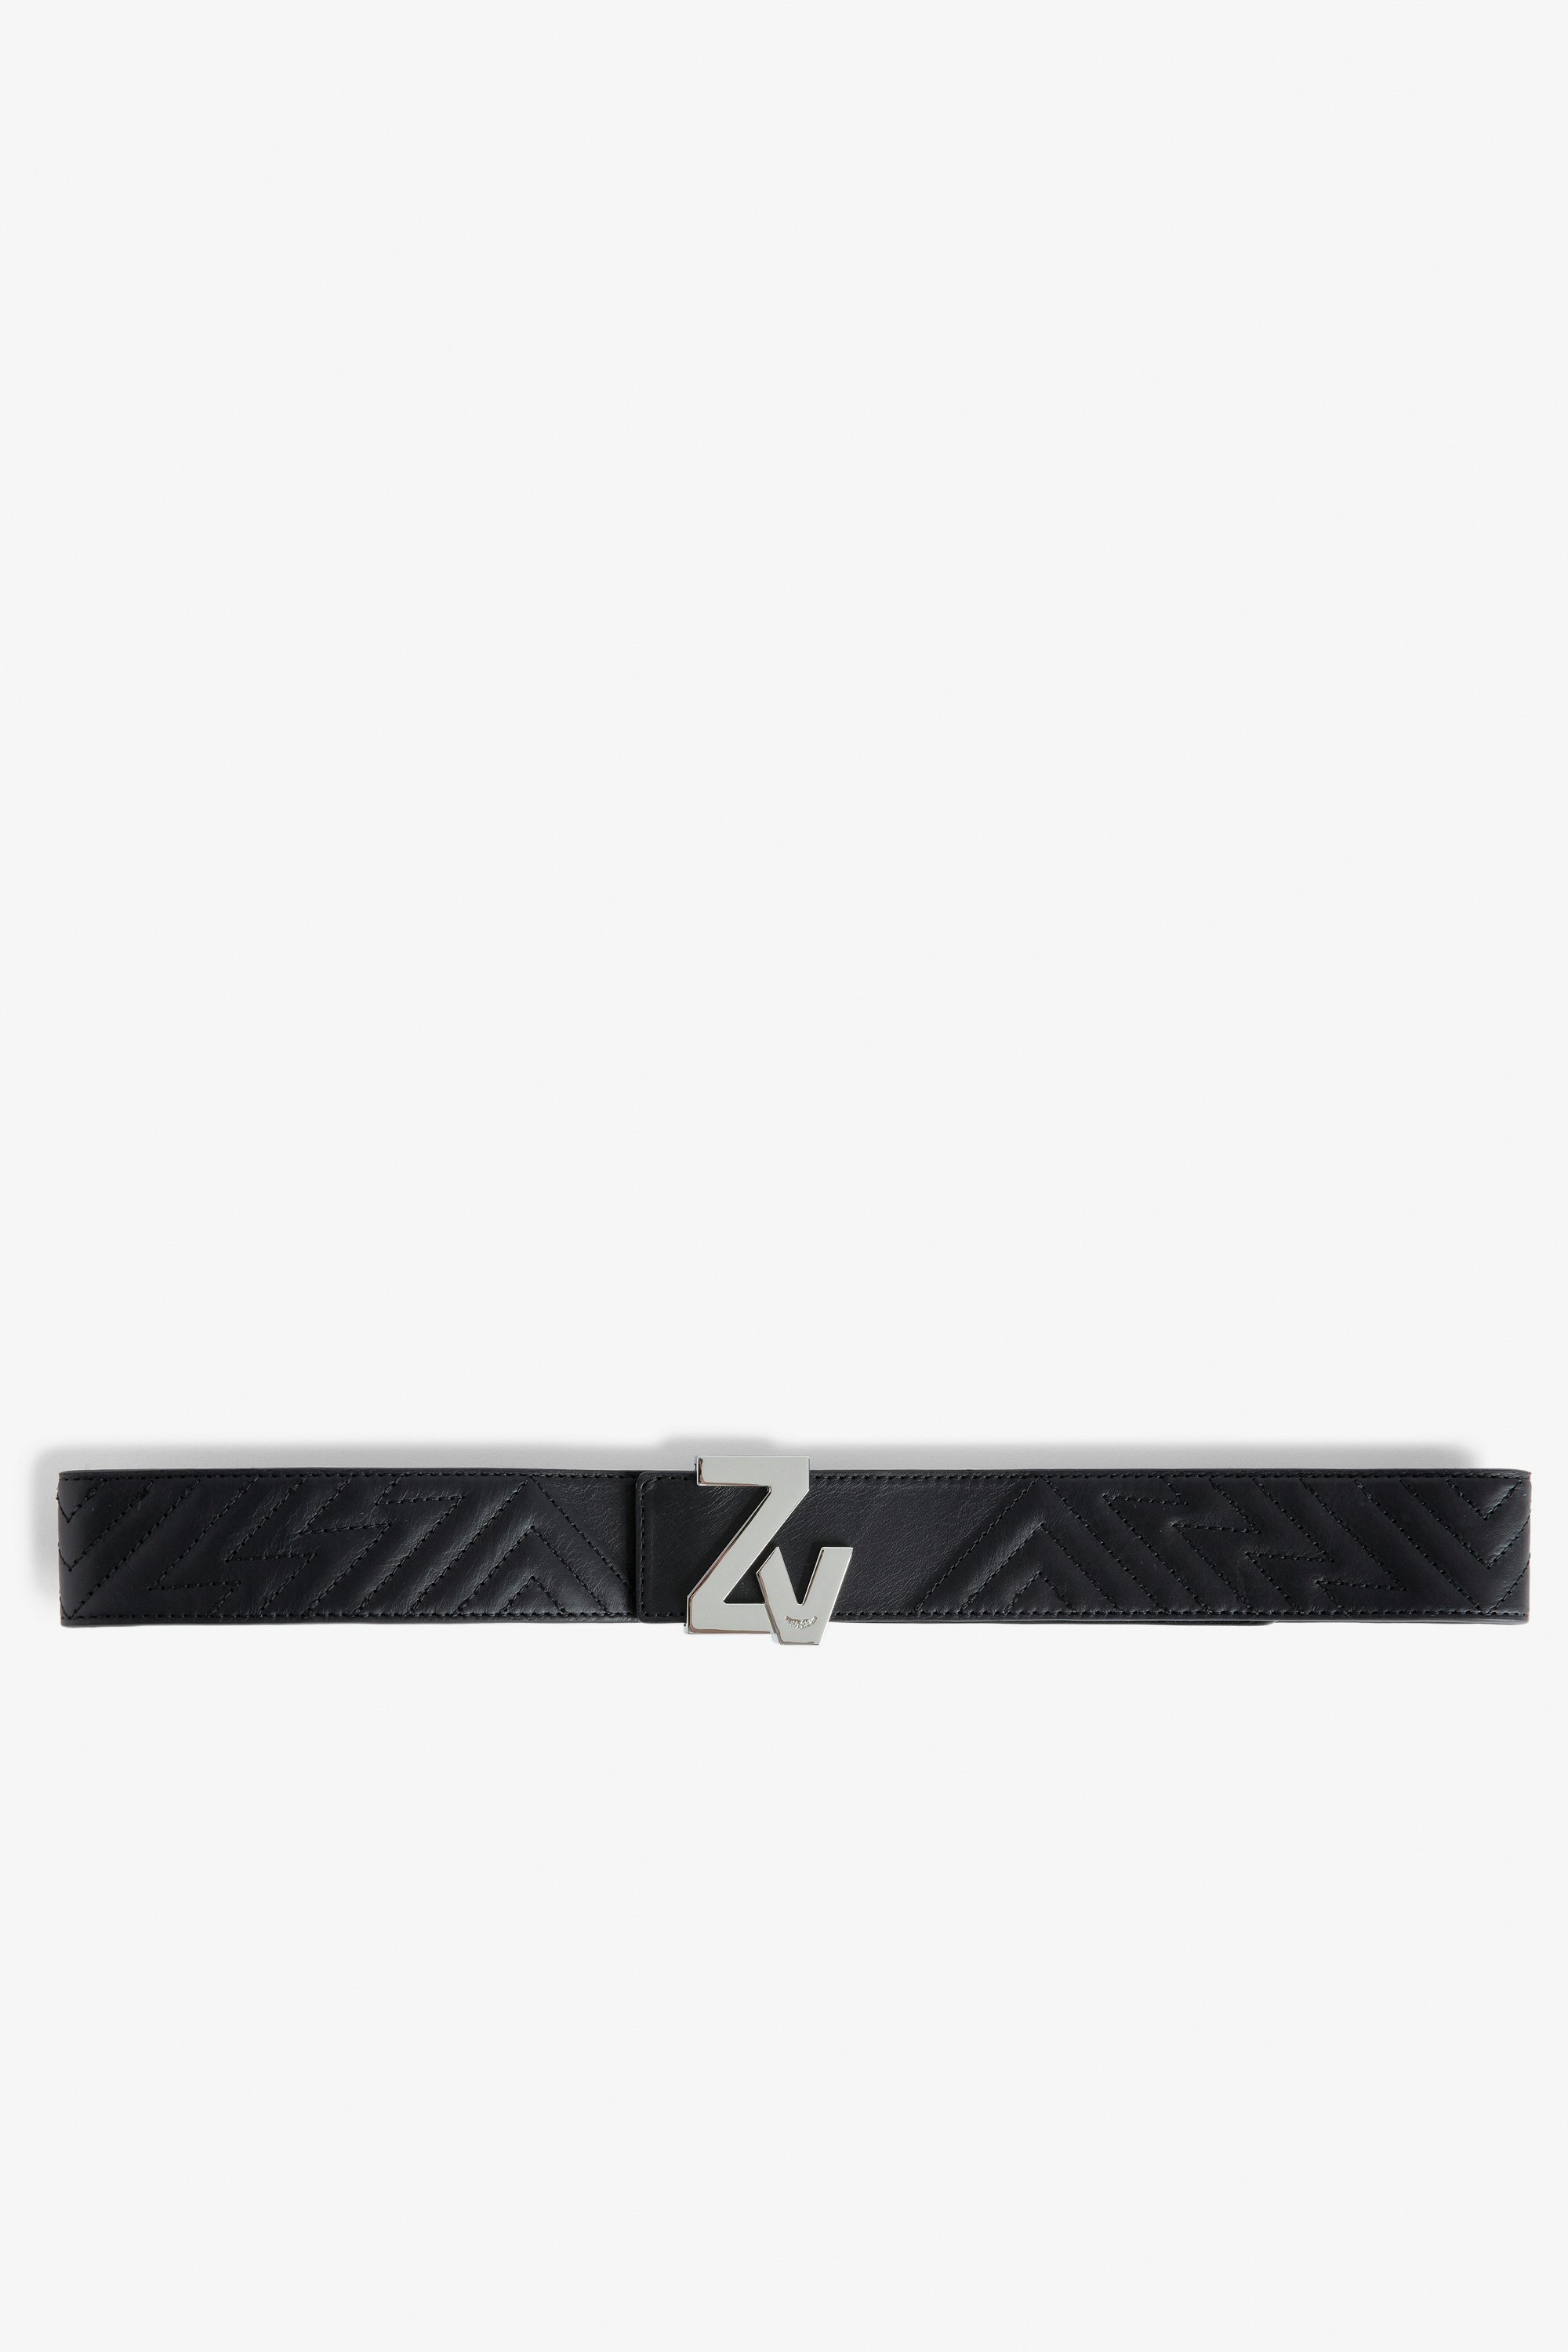 ZV Initiale La Best Belt - Women’s black quilted vegetable-tanned leather belt with ZV buckle and overstitching.